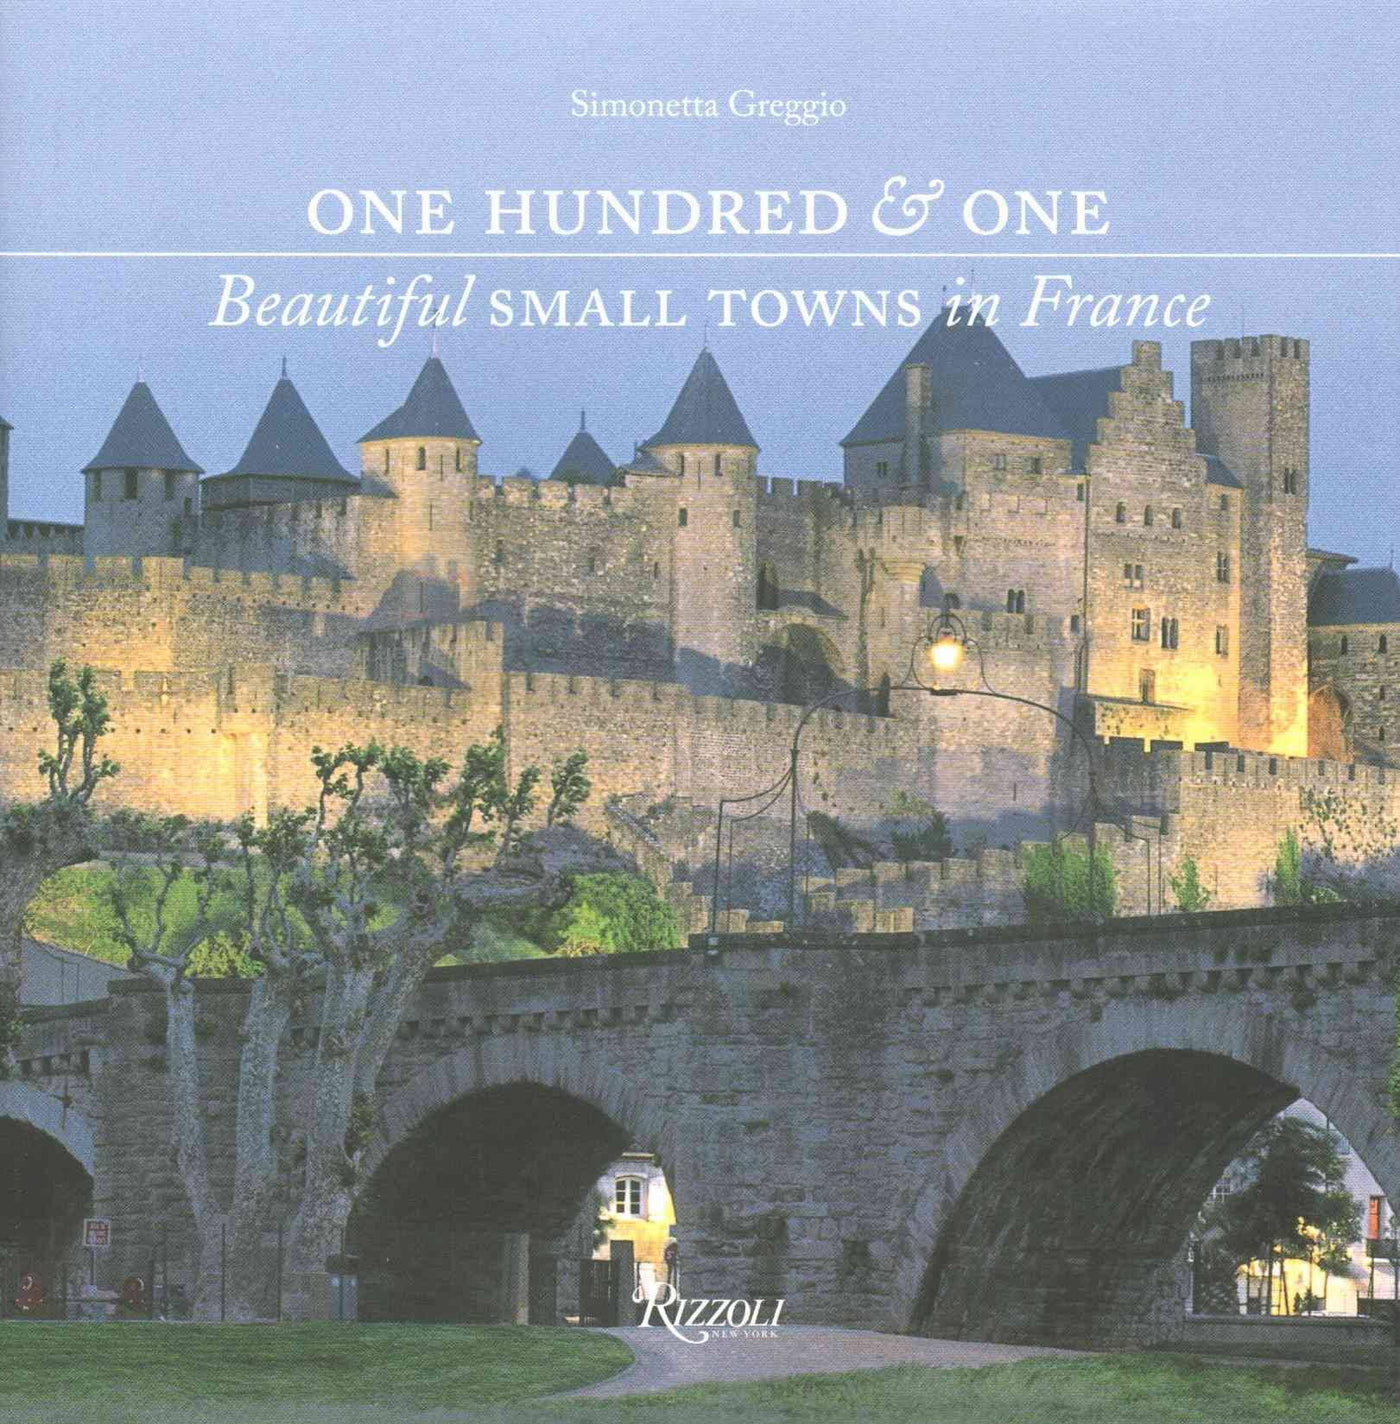 One Hundred & One Beautiful Small Towns in France